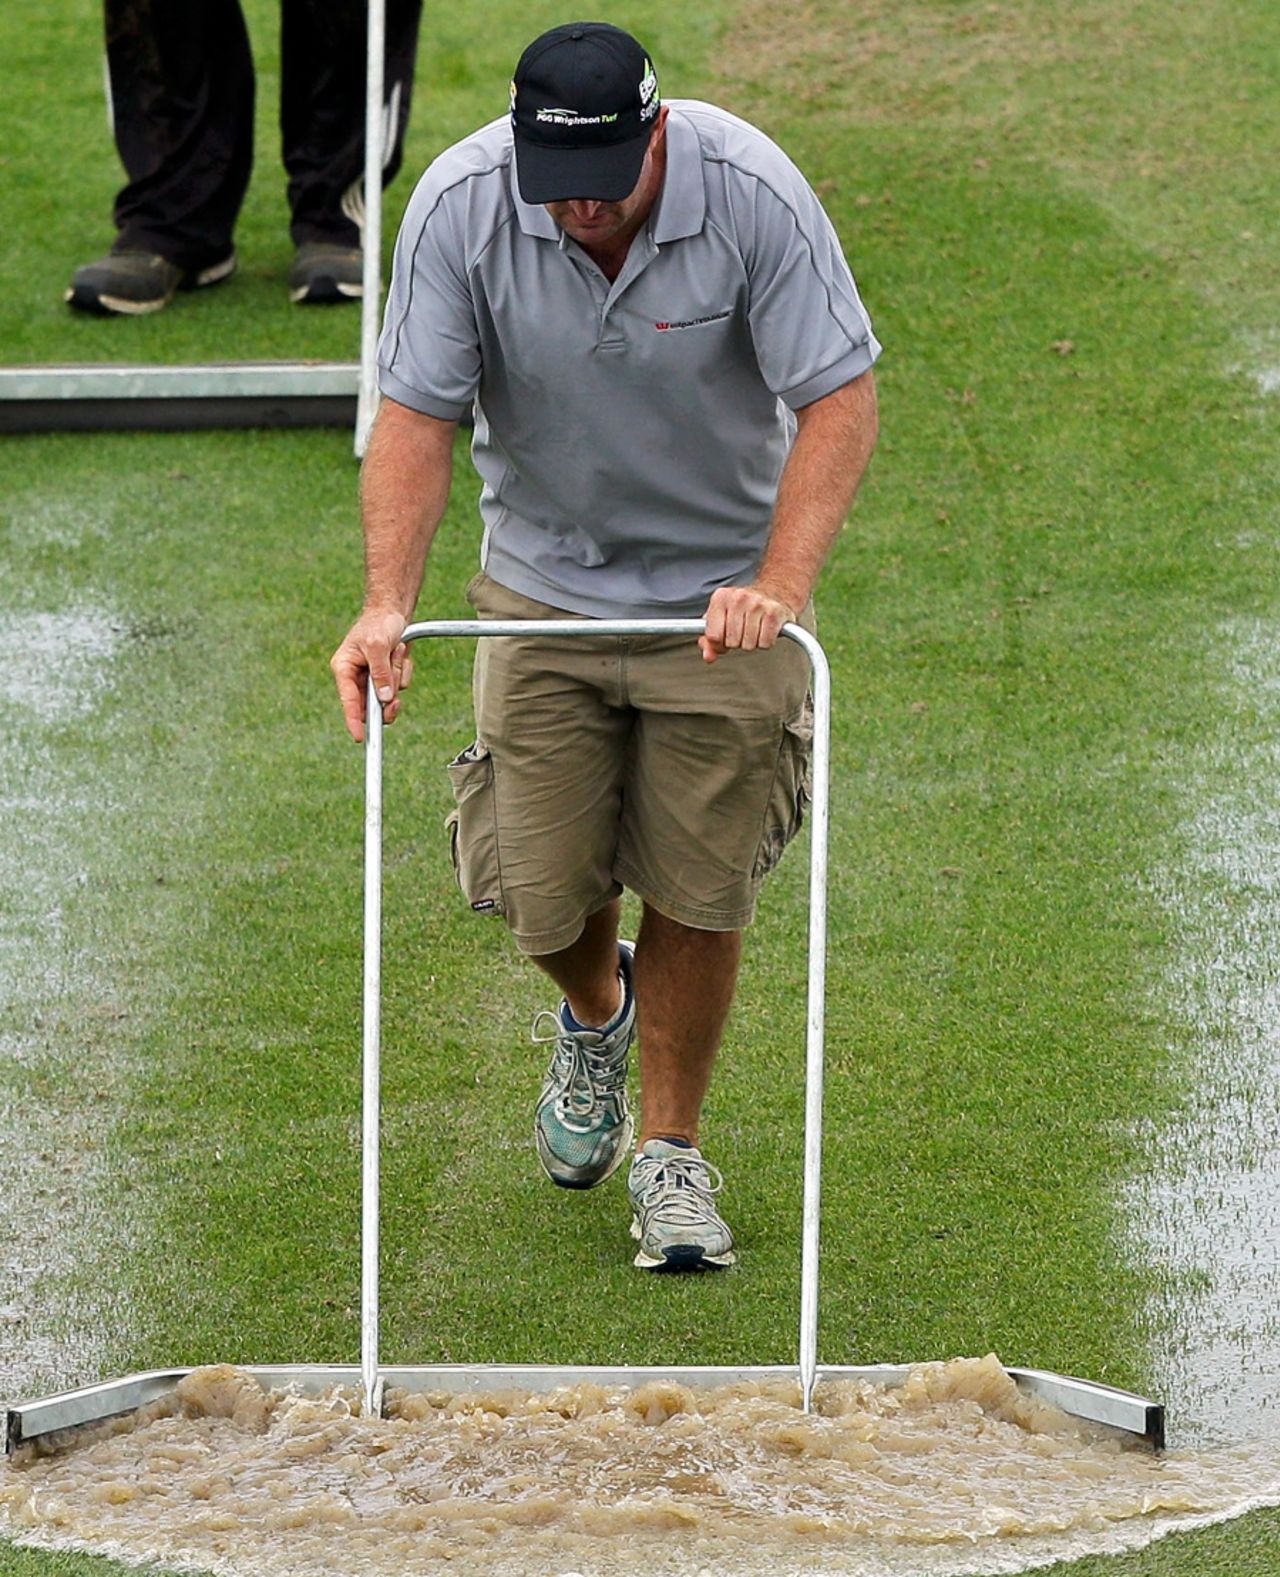 Groundstaff at work to clear water at the Basin Reserve, New Zealand v England, 2nd Test, Wellington, 4th day, March 17, 2013